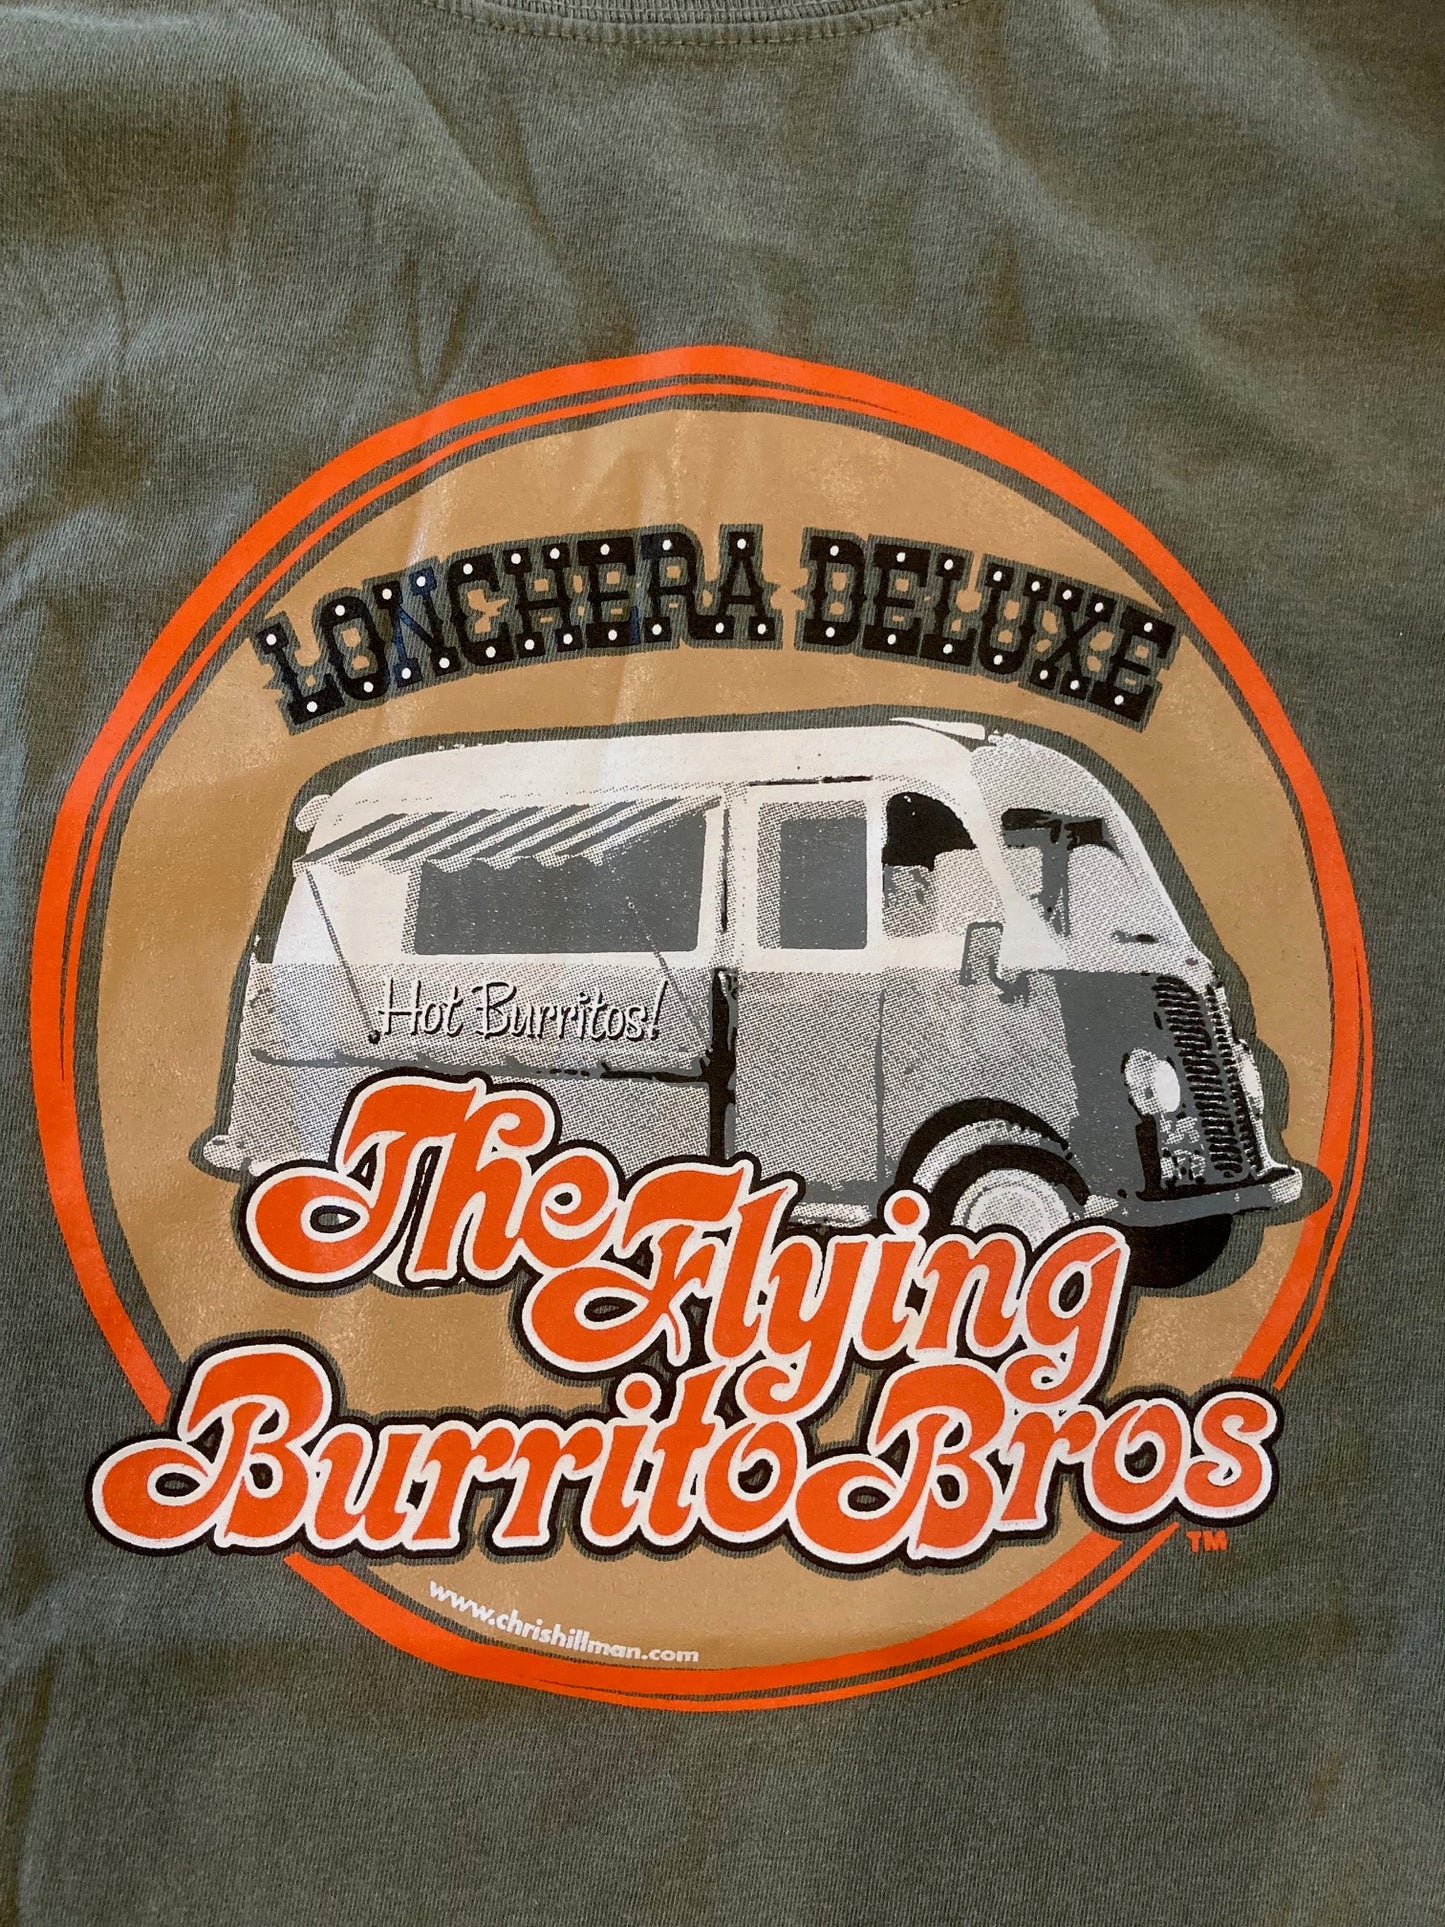 Flying Burrito Brothers "Lonchera" T shirt in Olive